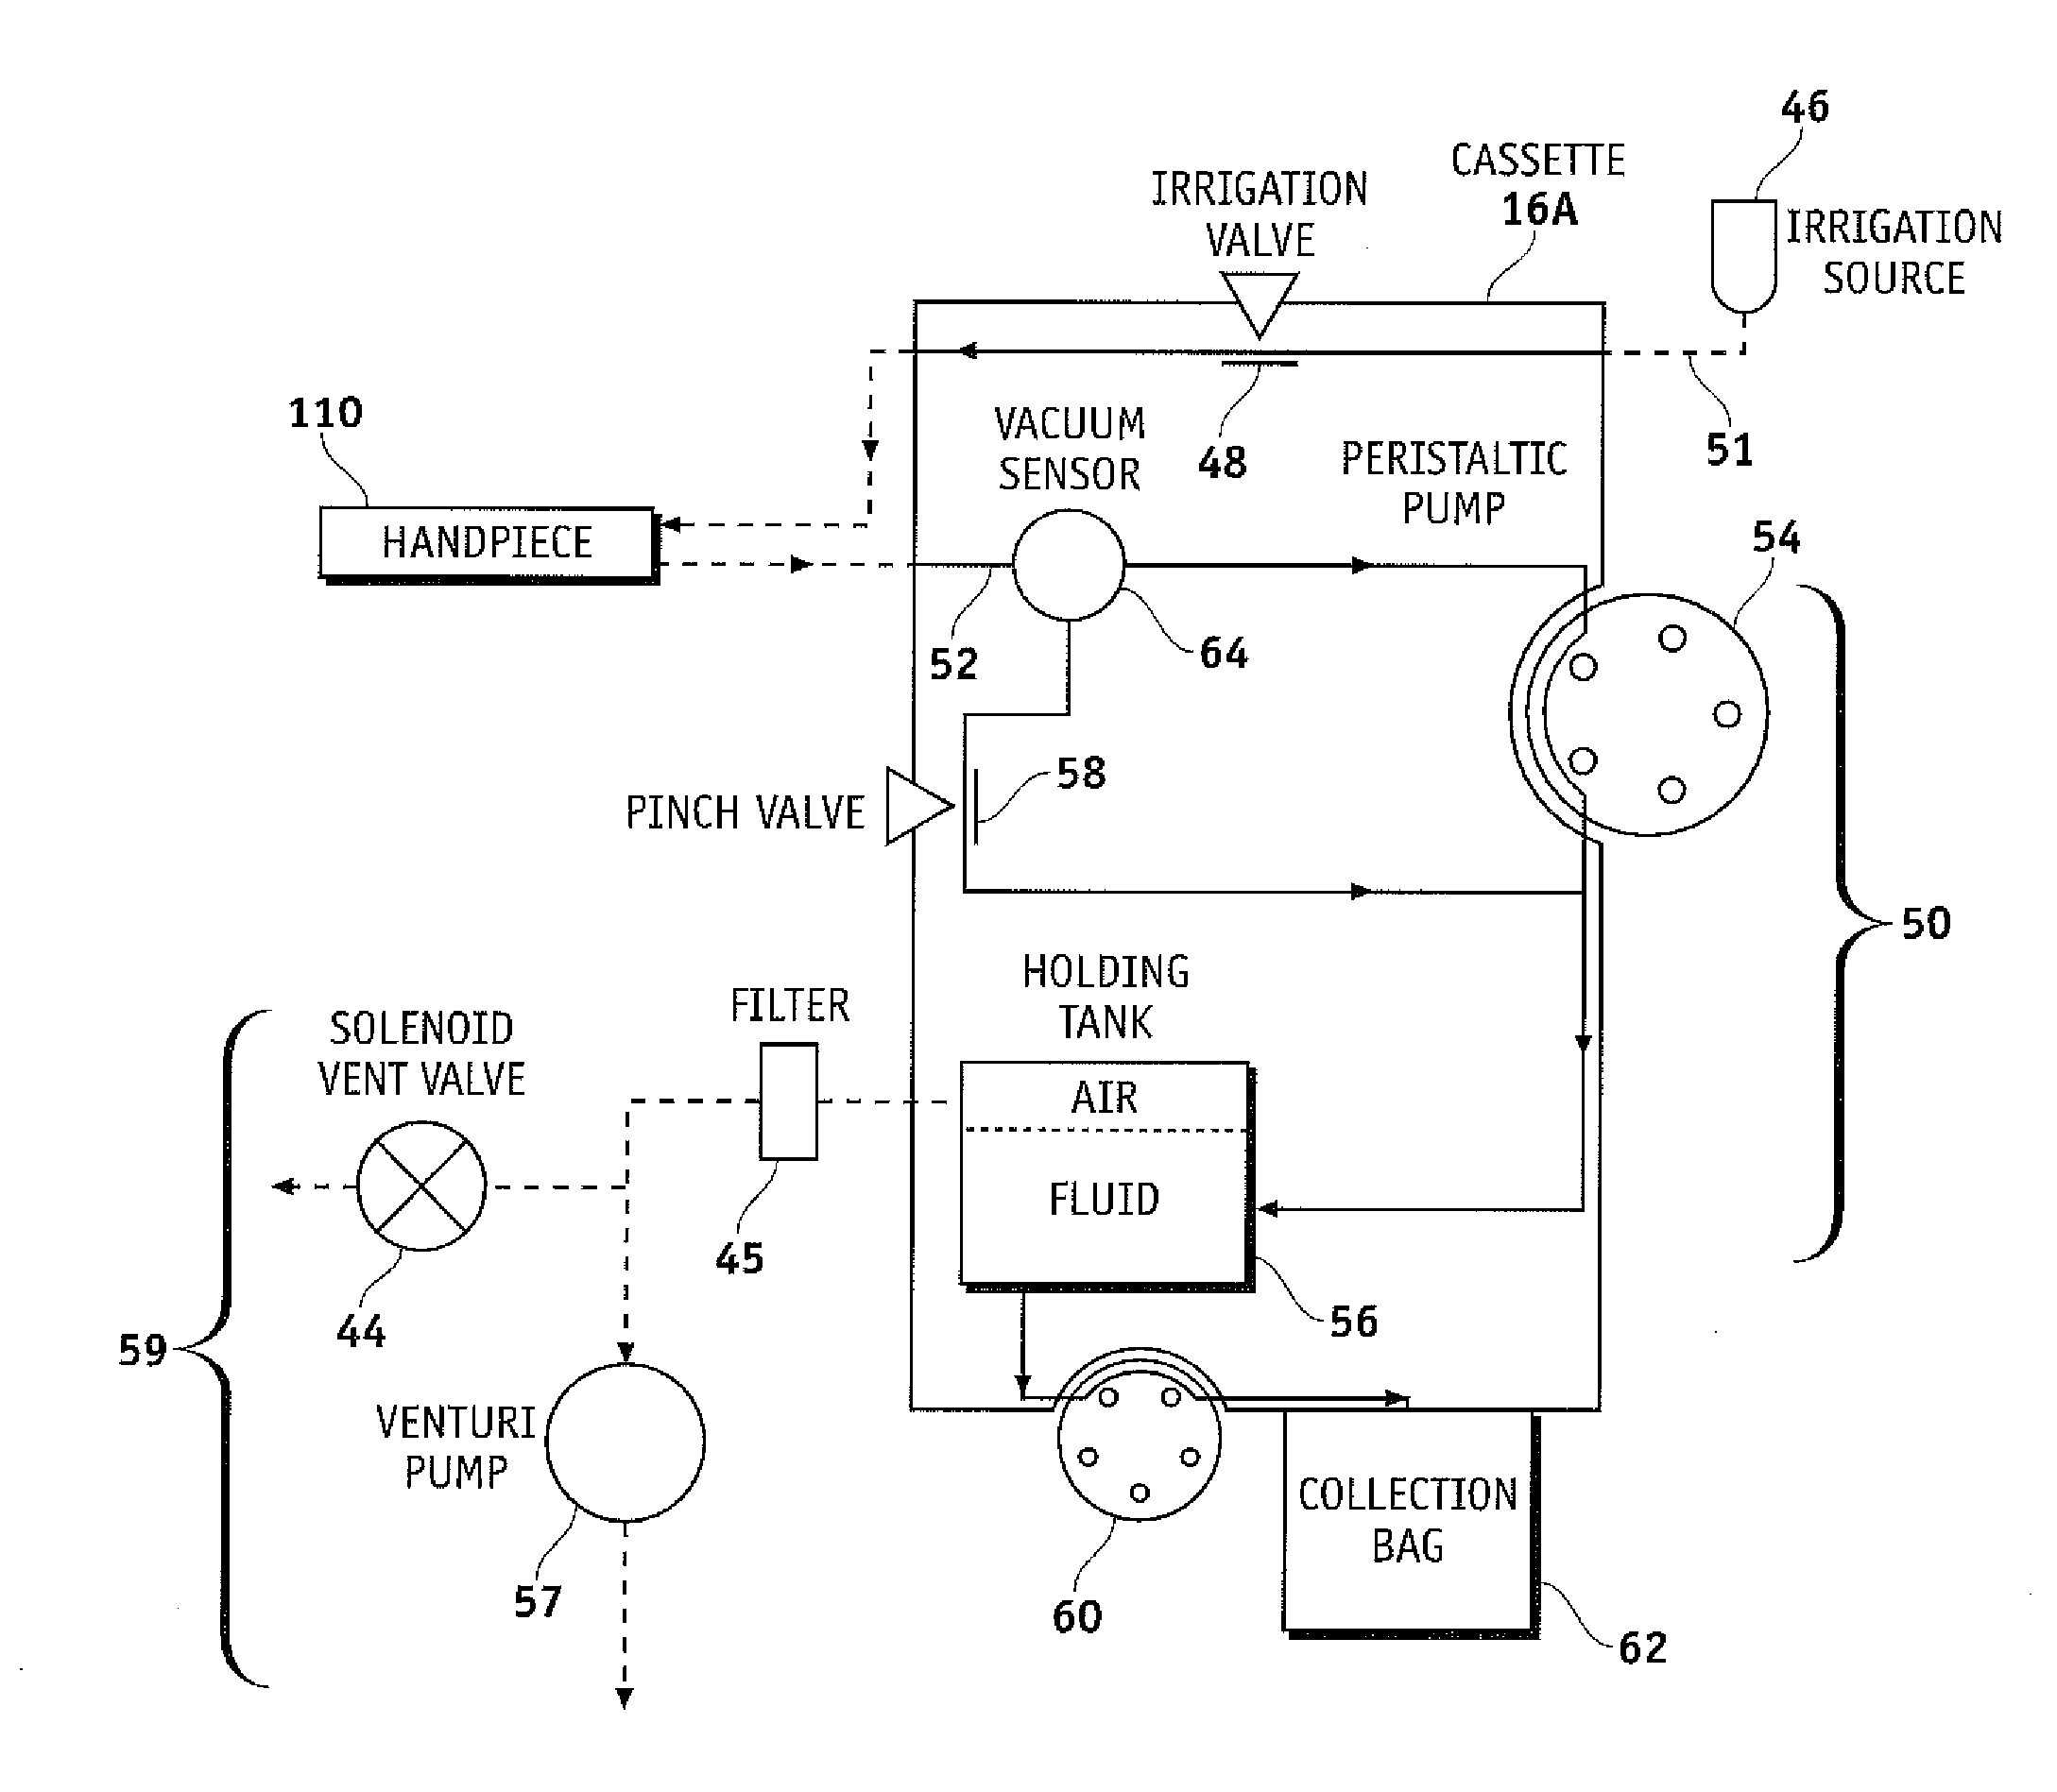 Automatically switching different aspiration levels and/or pumps to an ocular probe